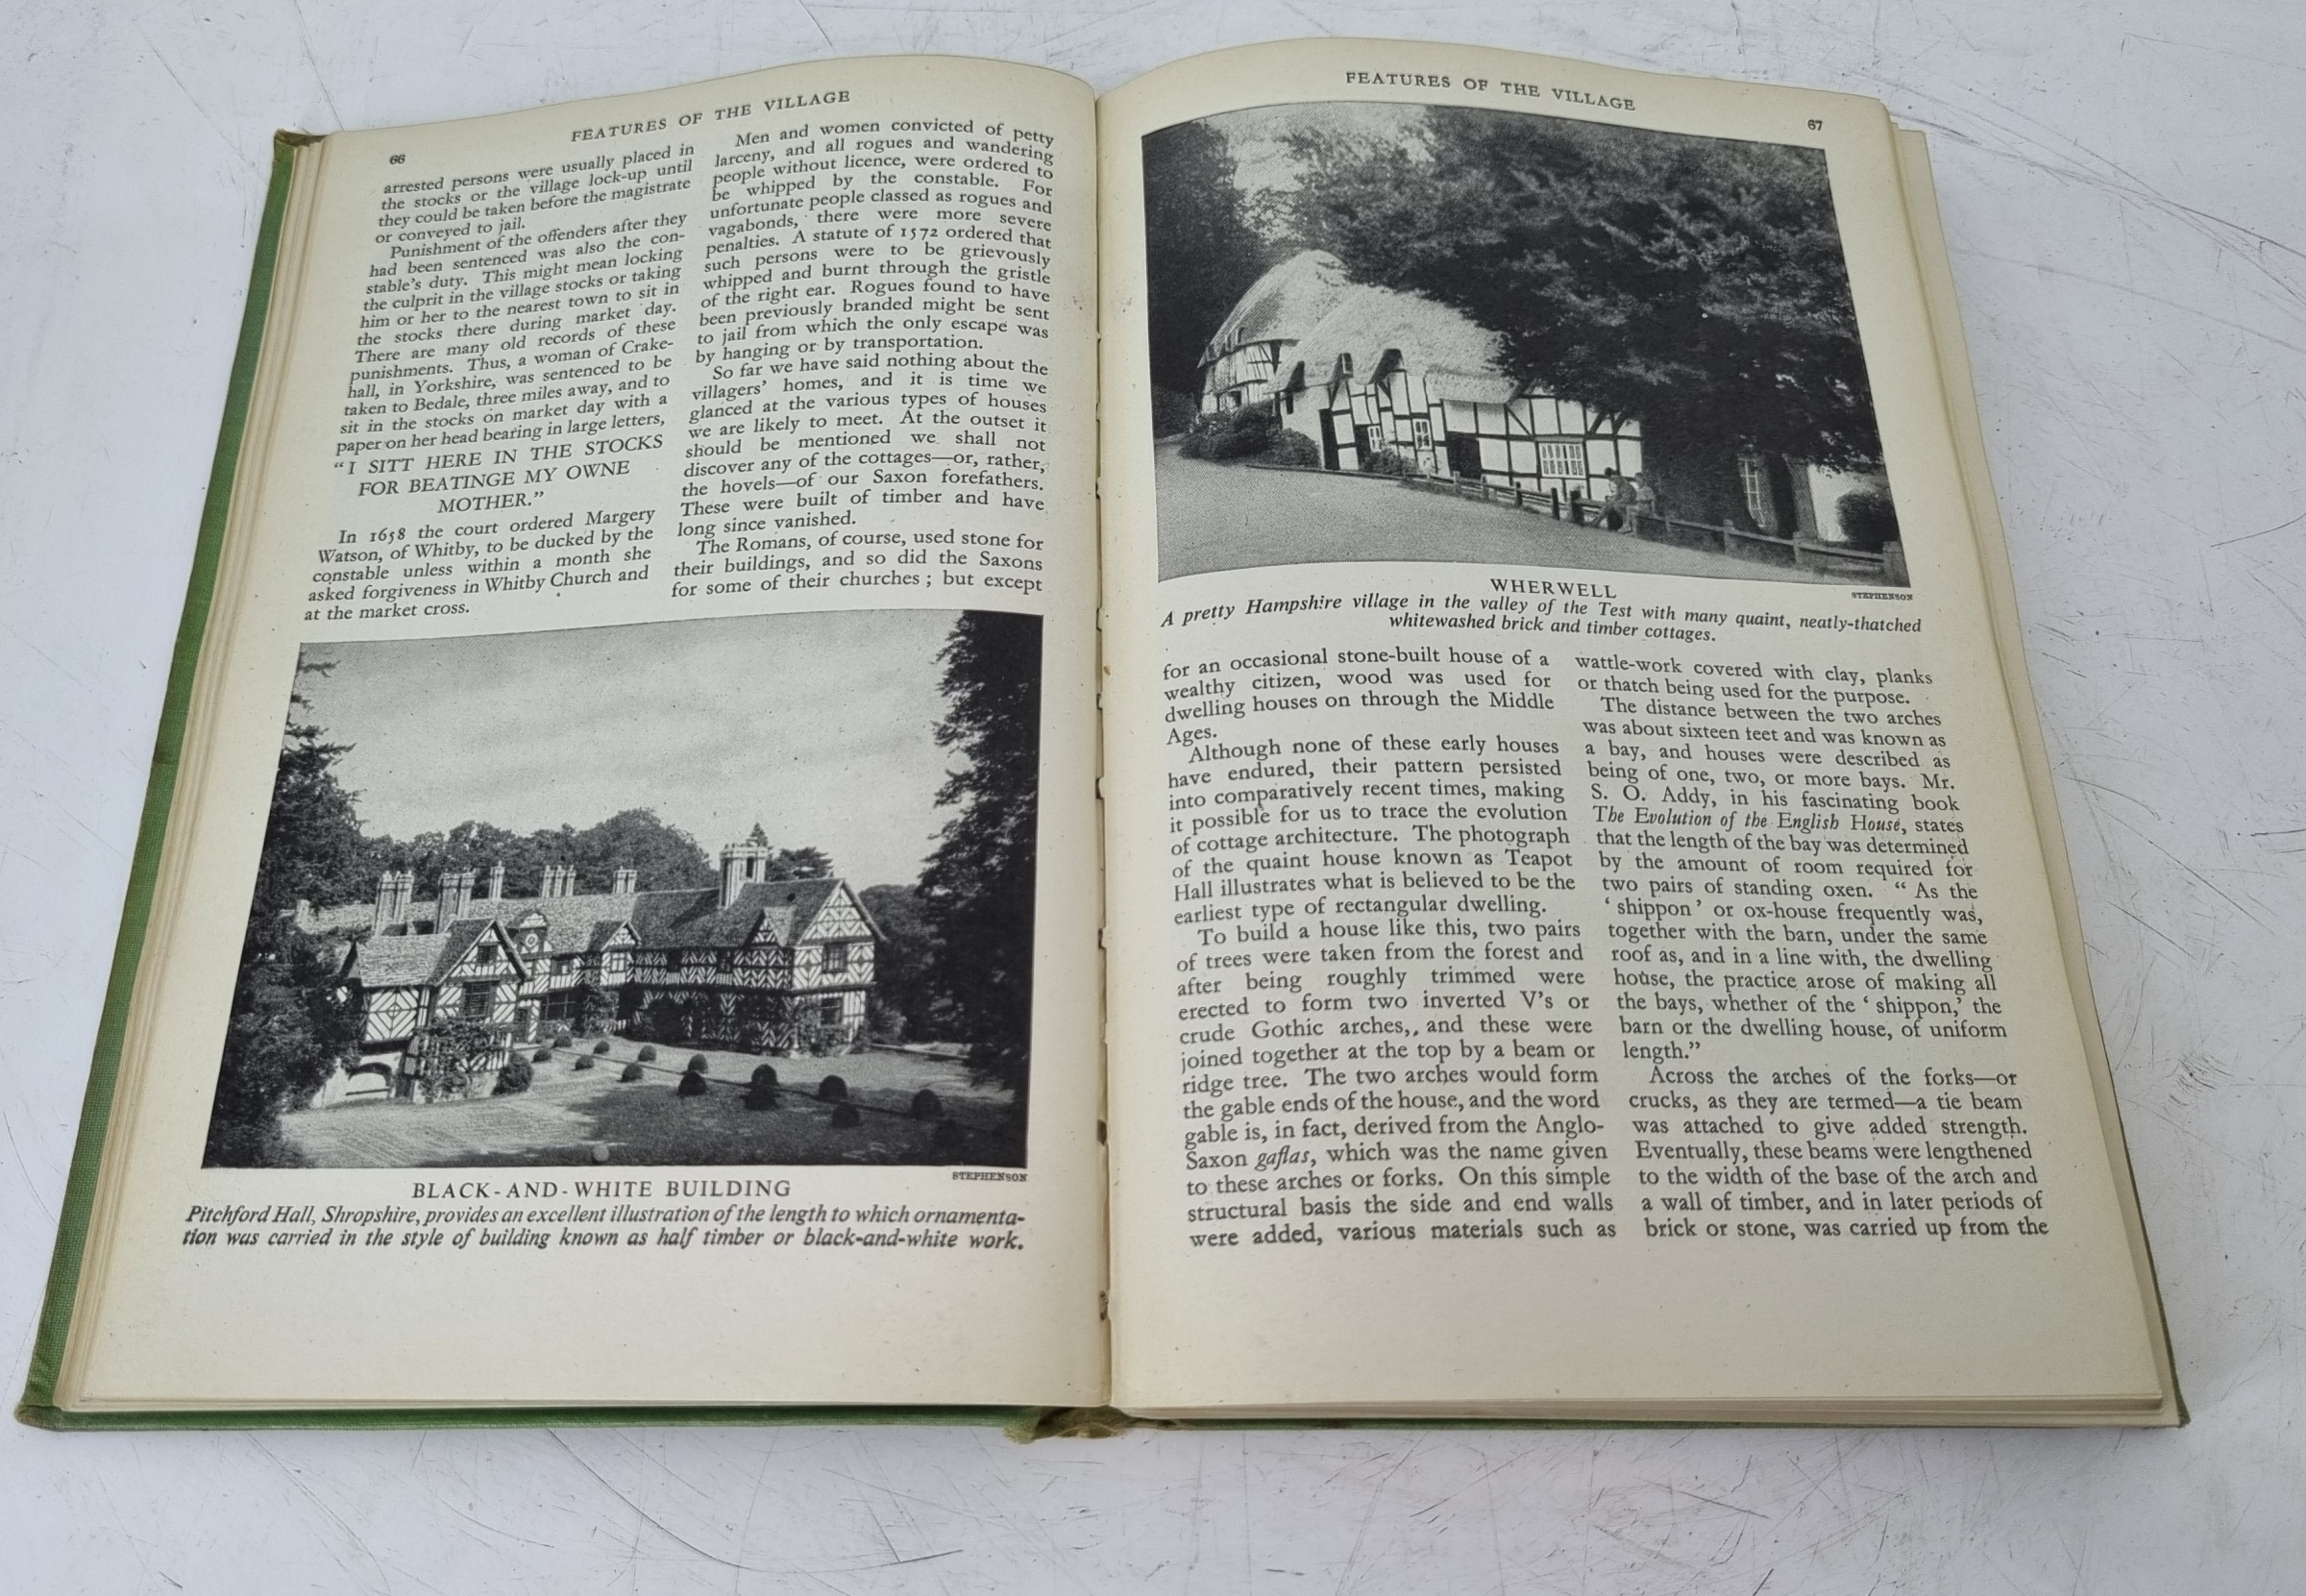 The Good Earth by Pearl S Buck - Published Norwich 1955, The Countryside Companion by Tom Stephenson - Image 6 of 13